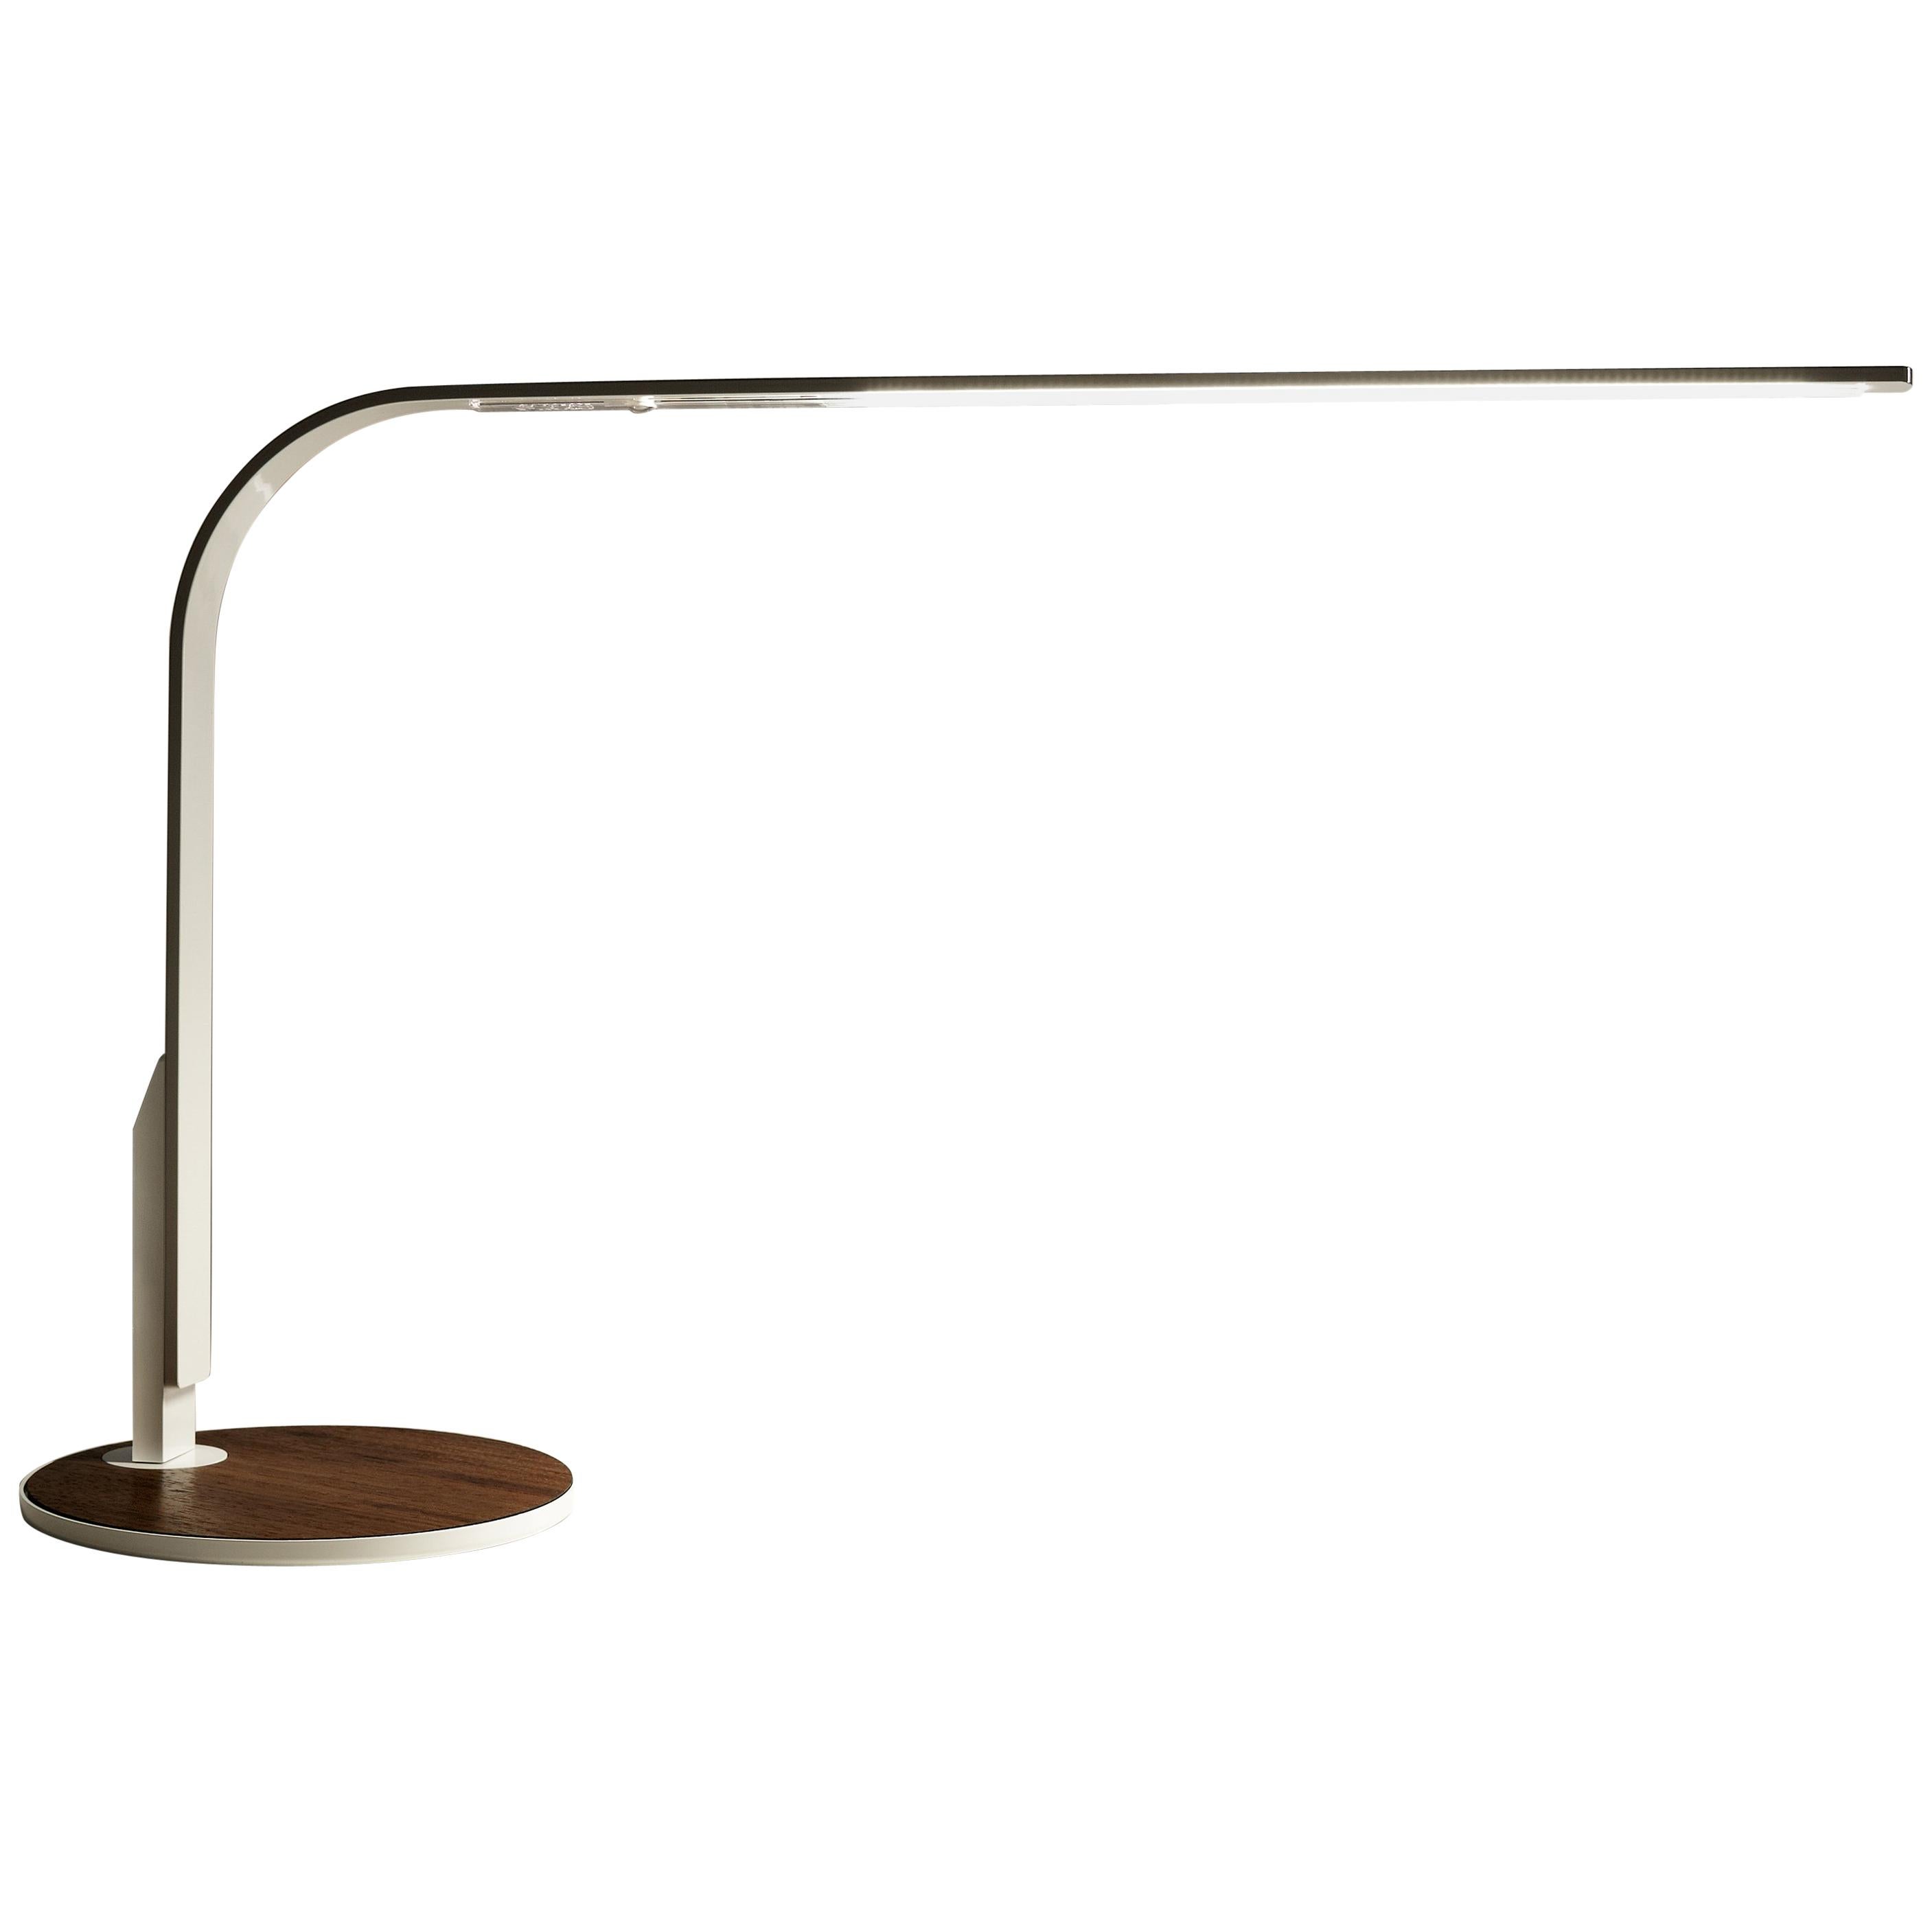 Lim360 Table Lamp in Aluminum and Walnut by Pablo Designs For Sale